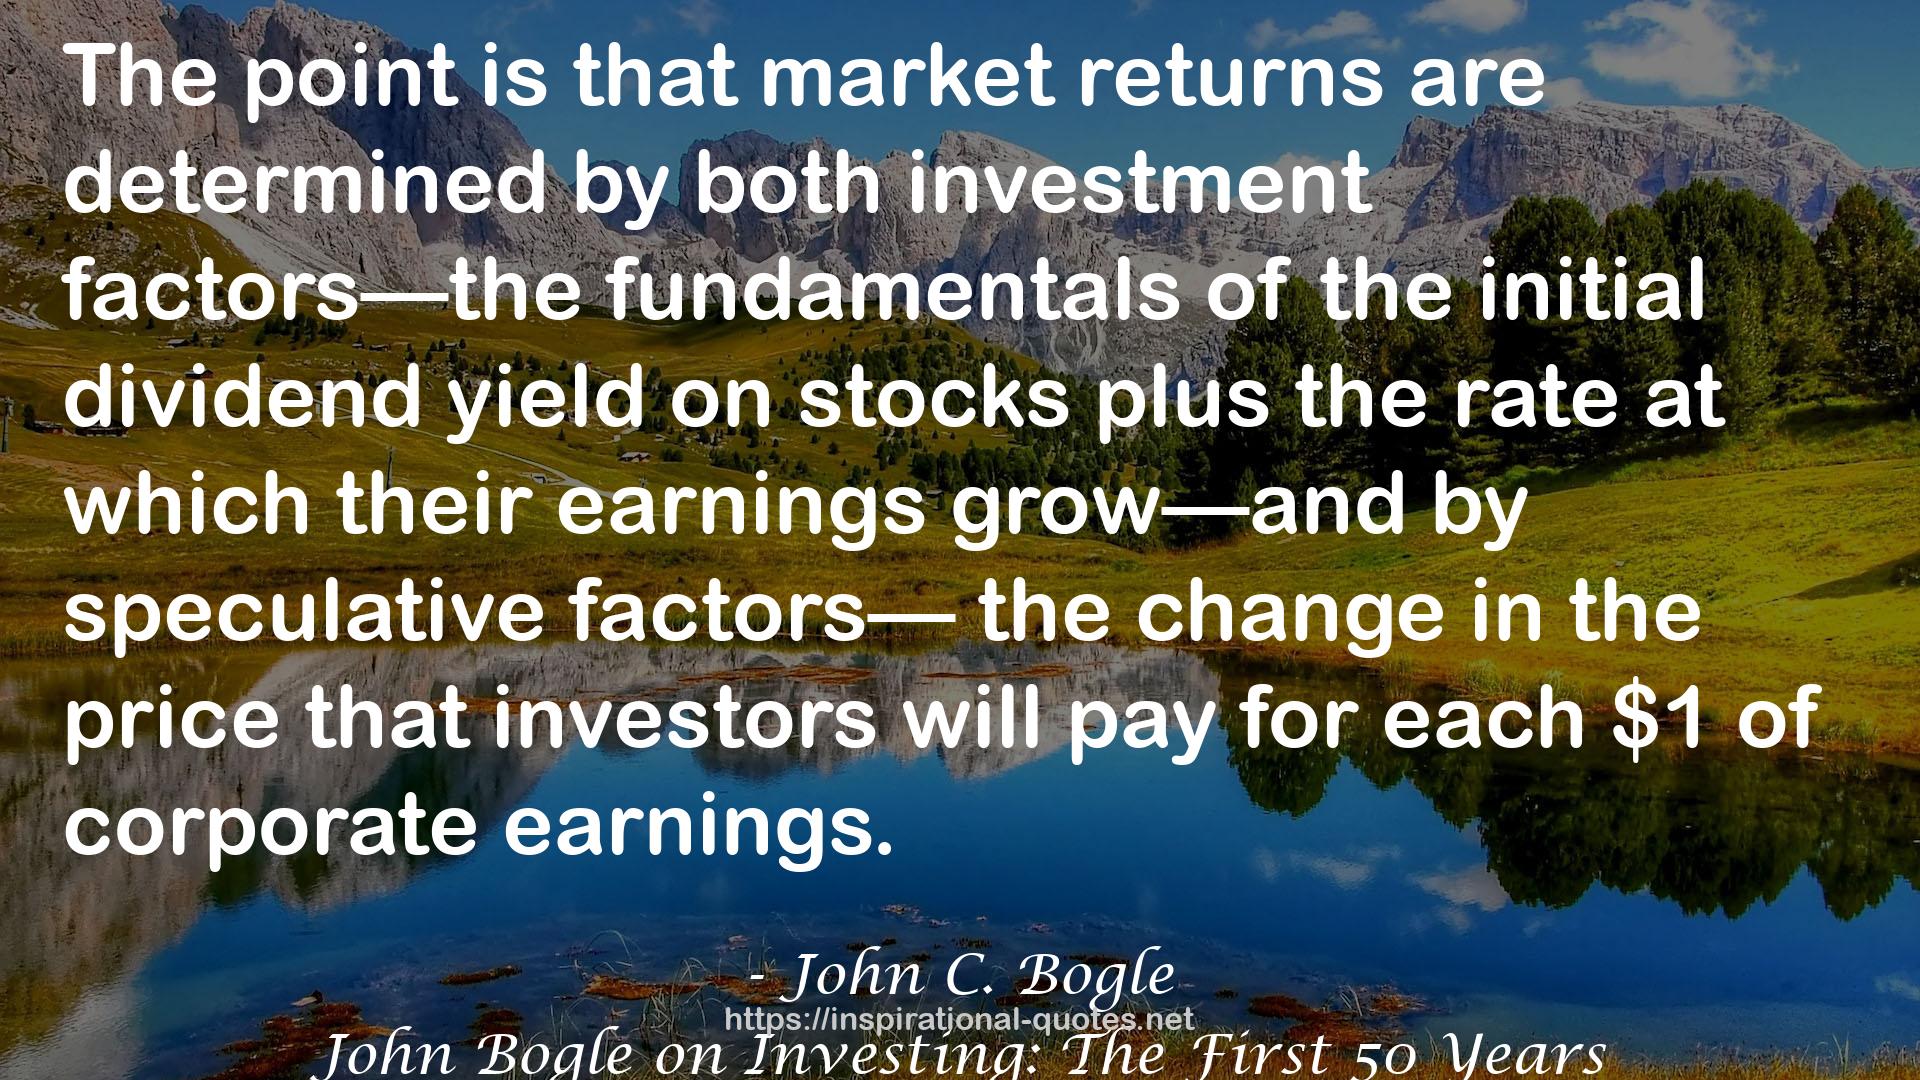 John Bogle on Investing: The First 50 Years QUOTES